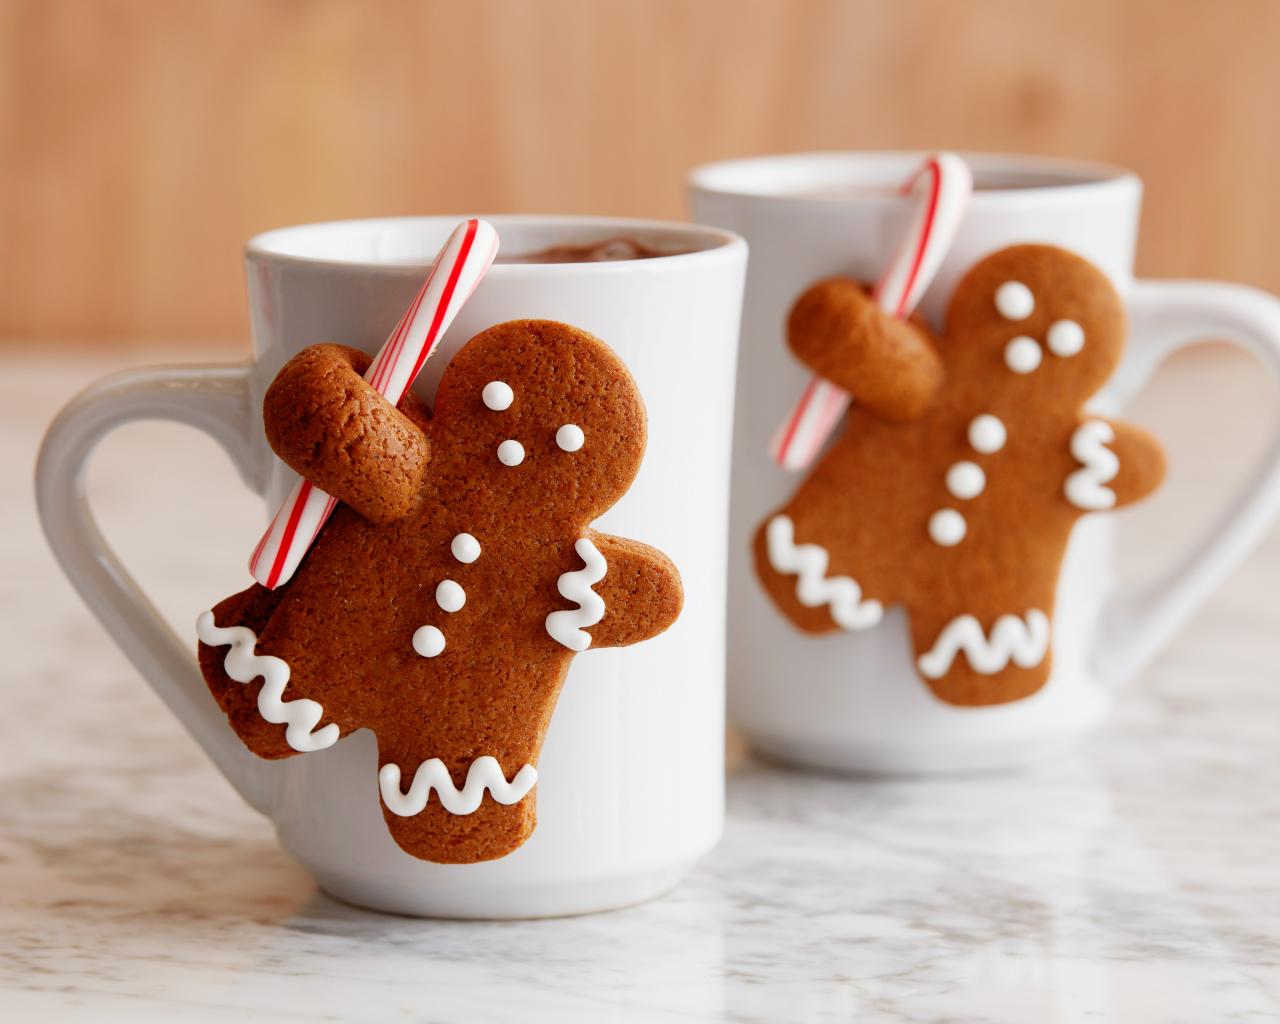 Cookie Mug Toppers Are the Hottest Holiday Food Trend of 2022